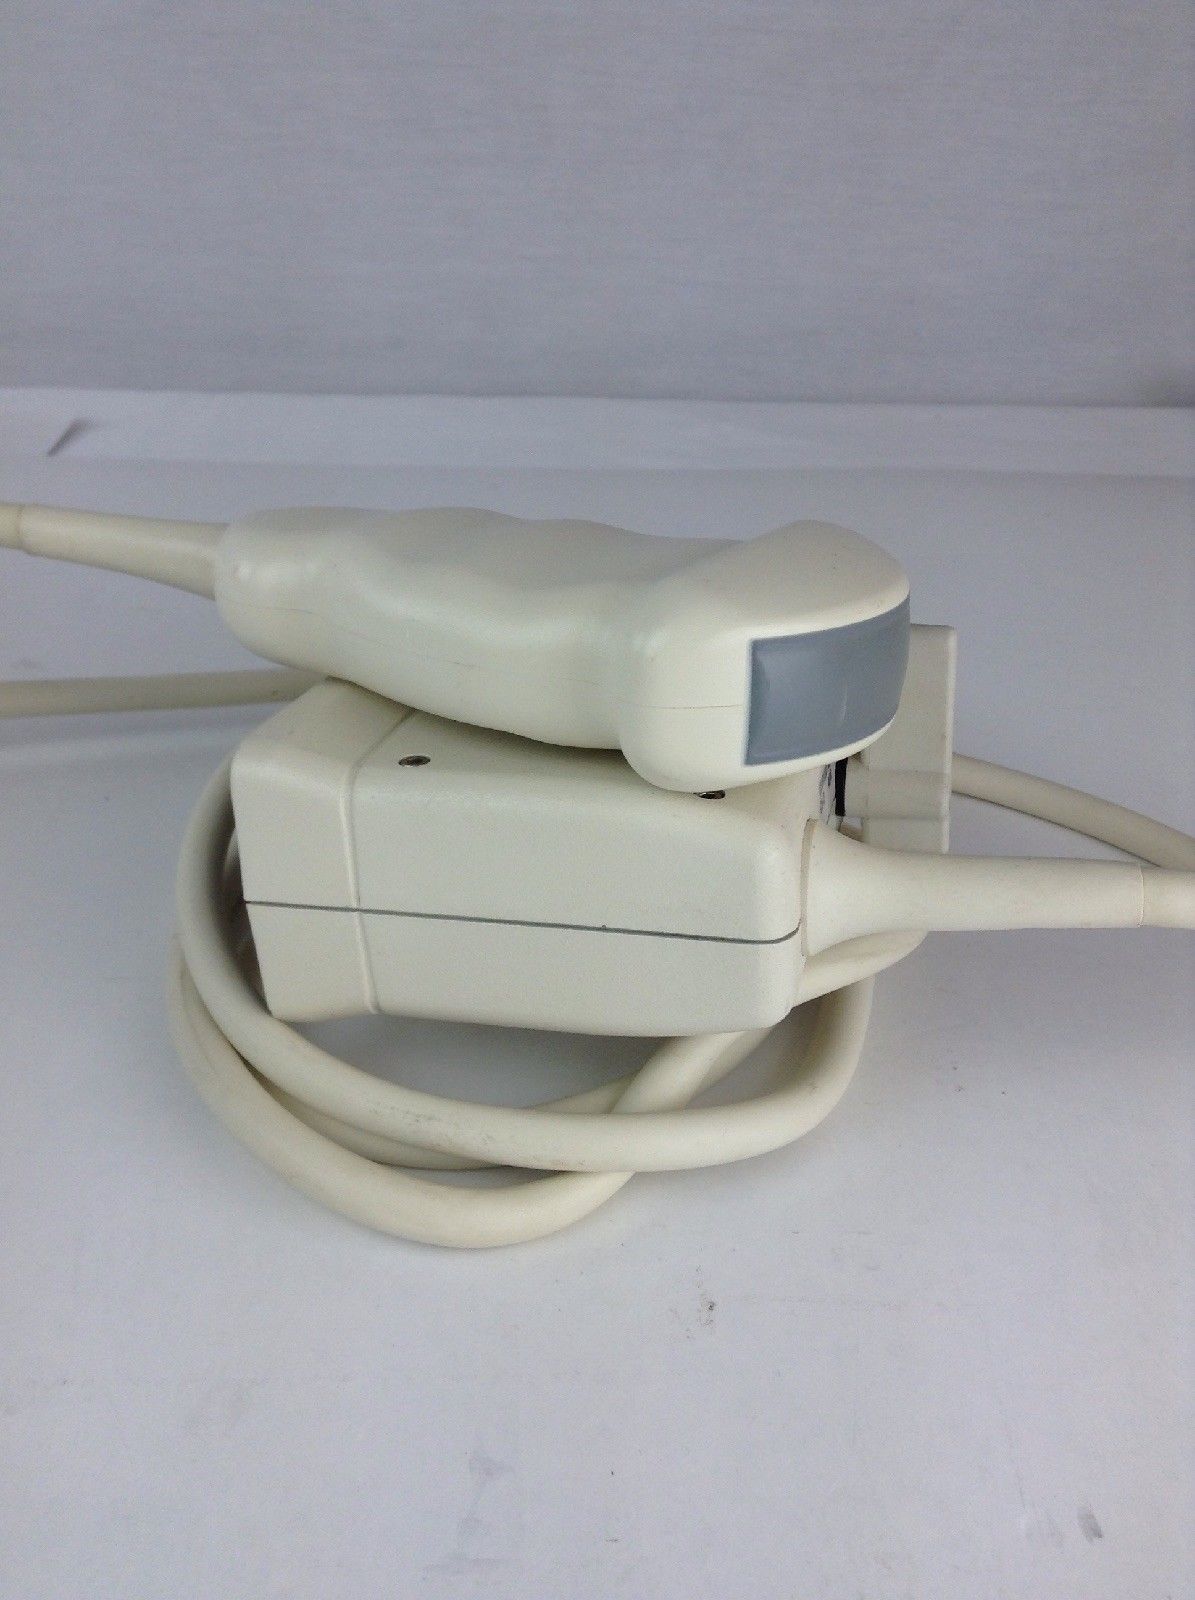 a cord connected to a device on a white surface